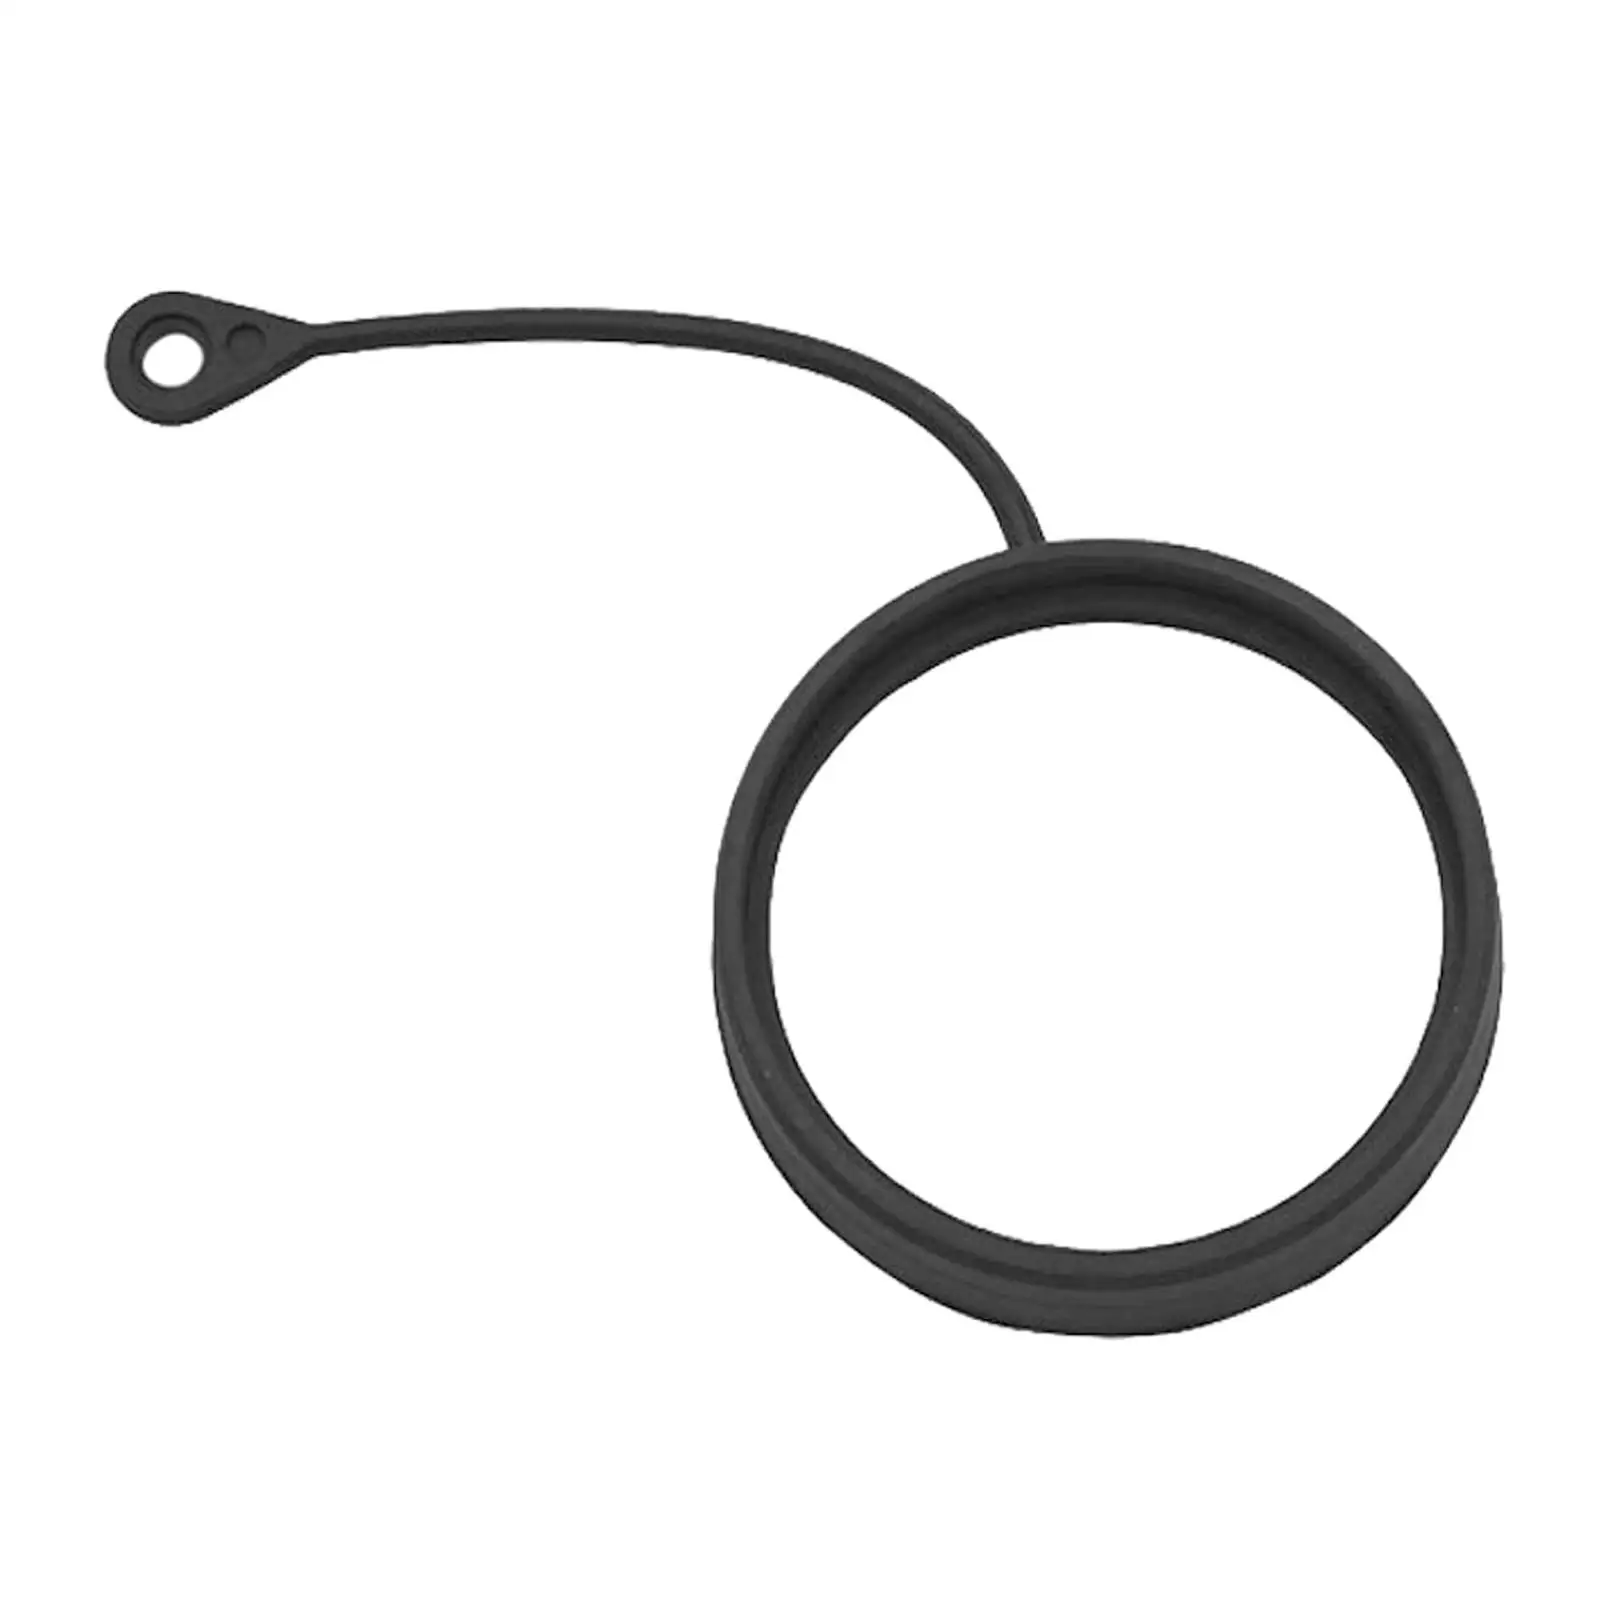 Vehicle Fuel Tank Caps Cord Line Wire, Accessory ABS Gas